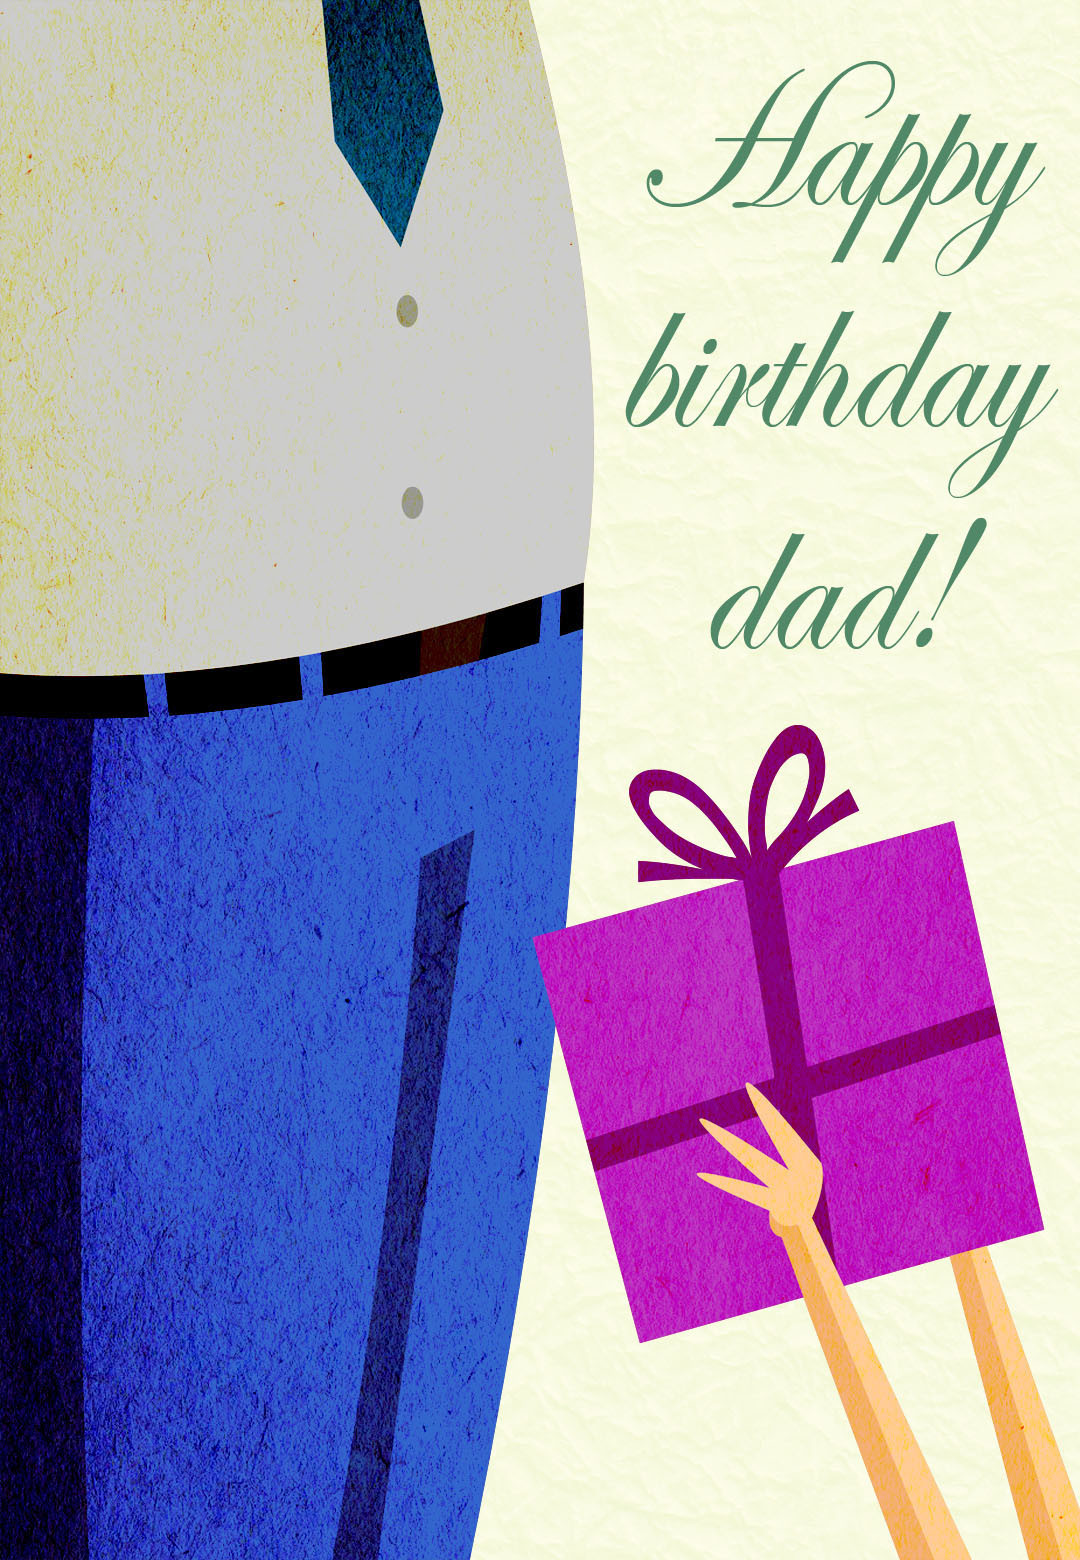 Free Printable Birthday Cards For Dad
 Happy Birthday Dad Free Birthday Card